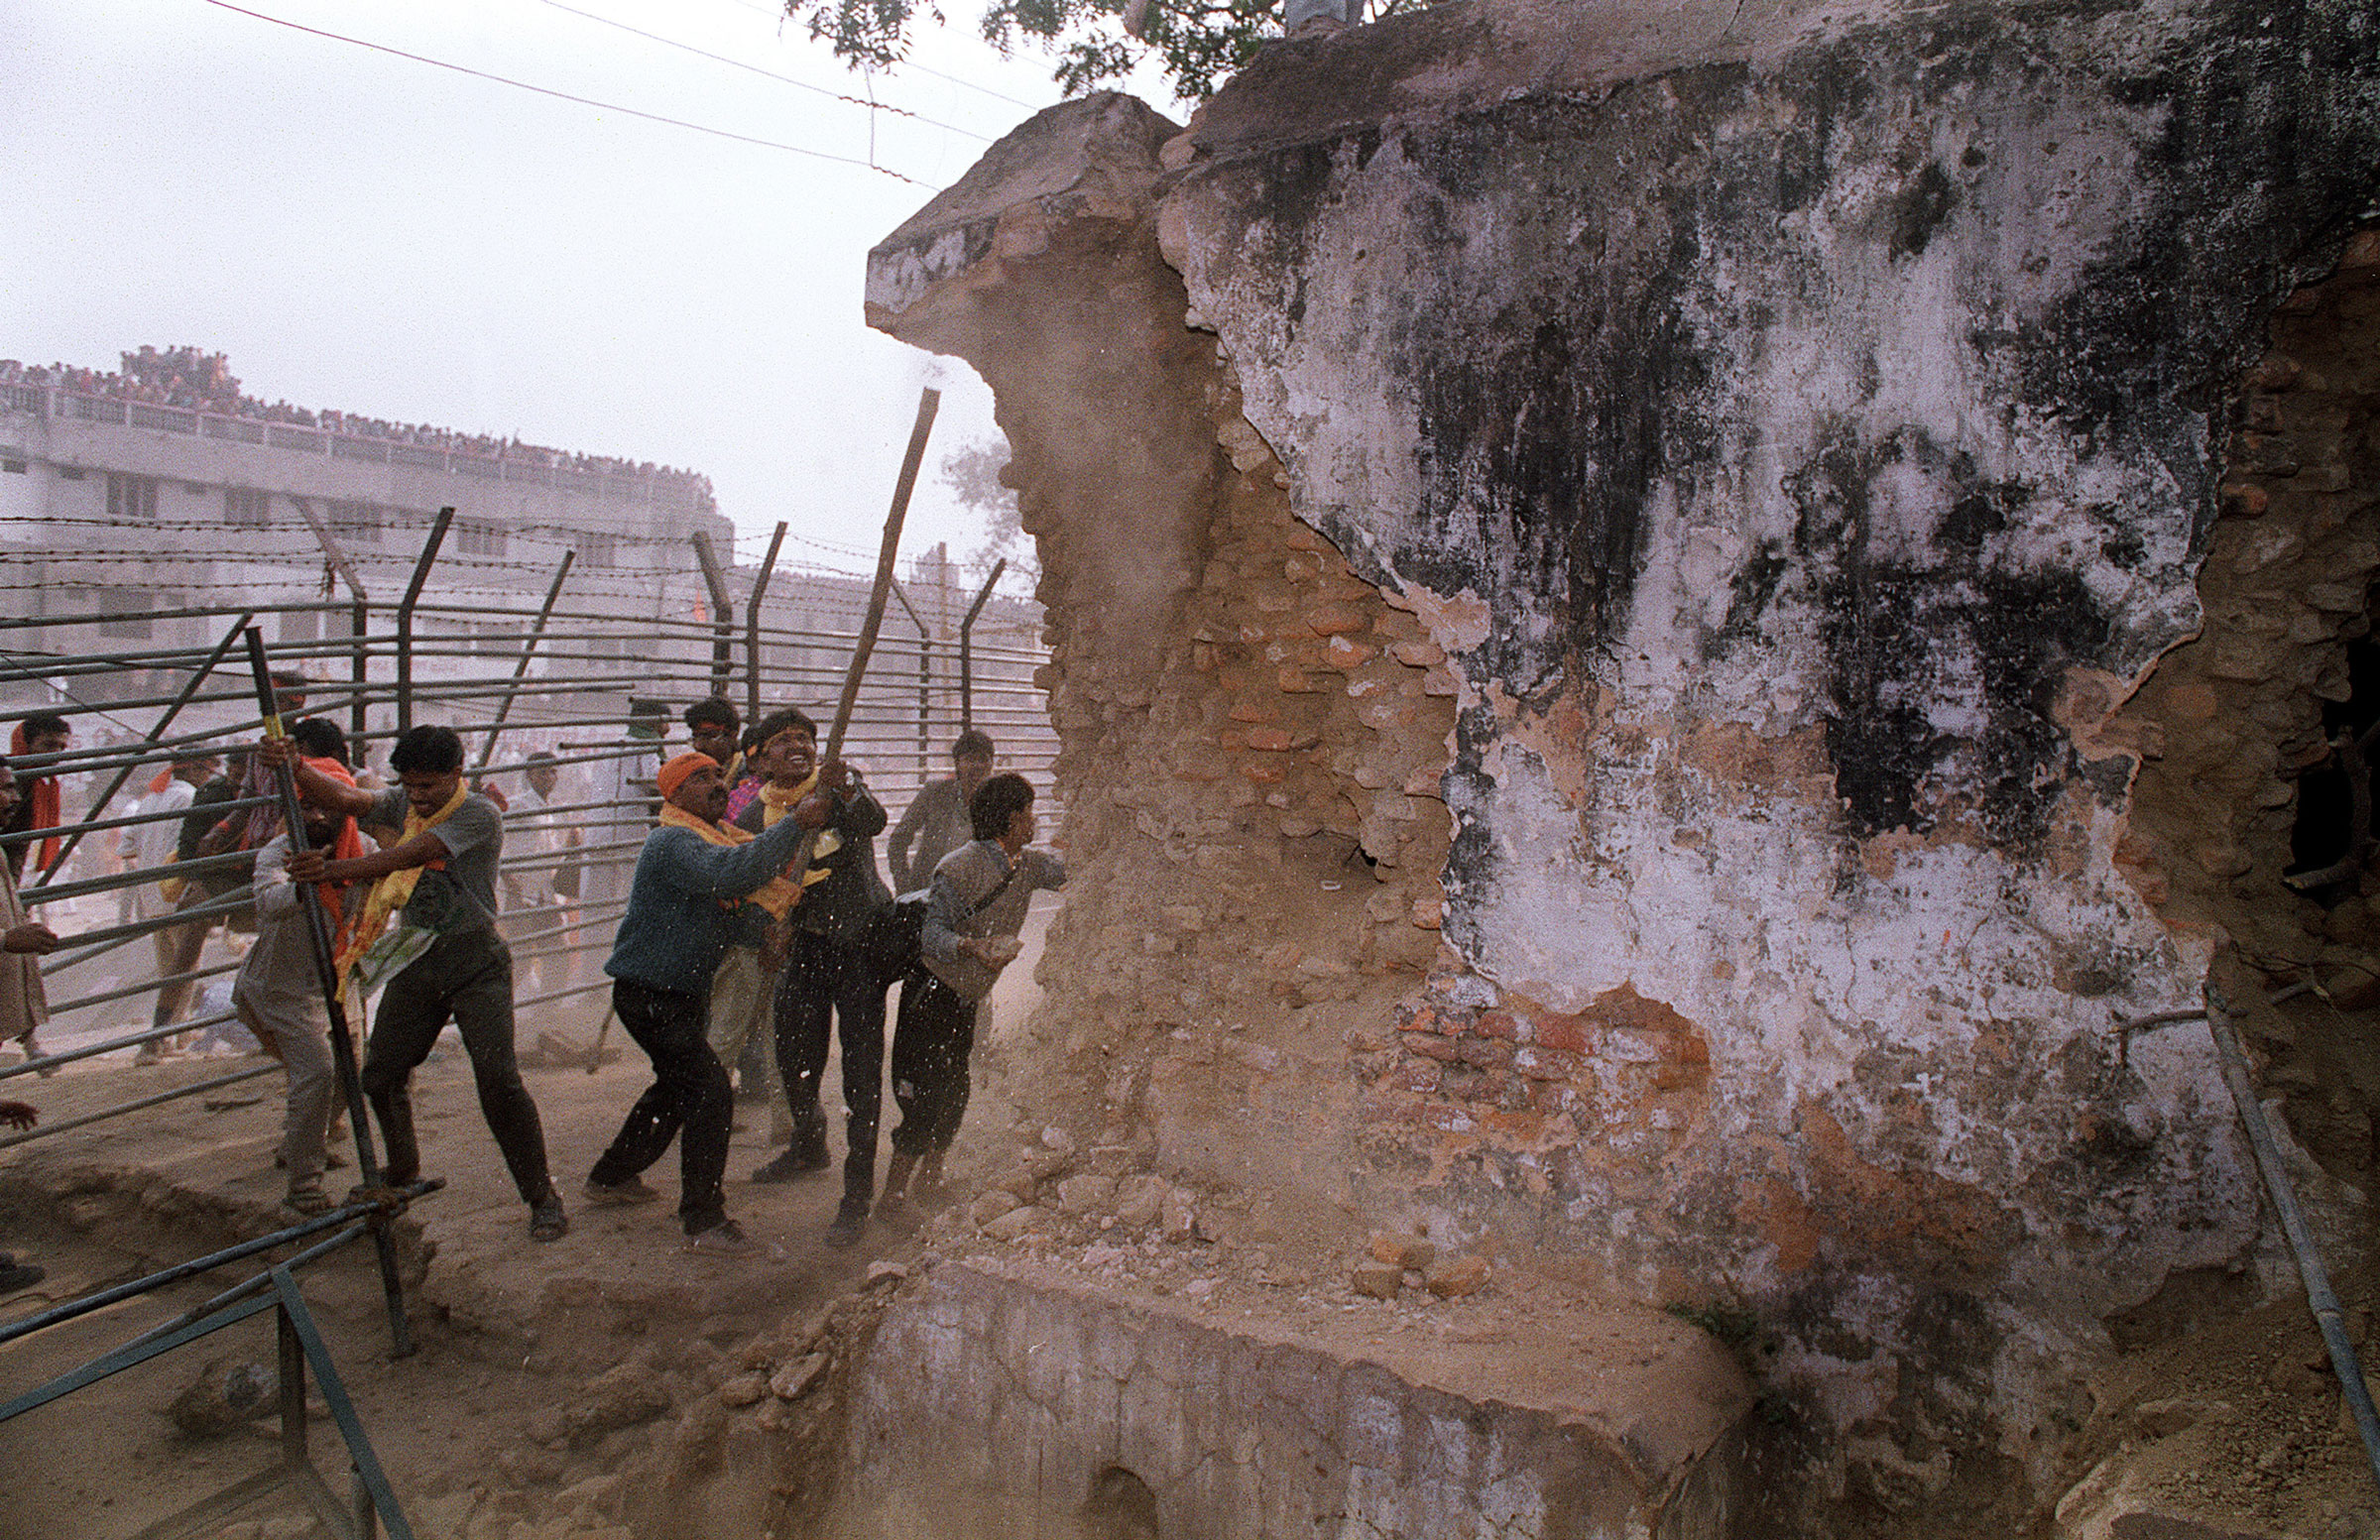 Hindu fundamentalists attack the wall of the 16th century Babri Masjid Mosque with iron rods